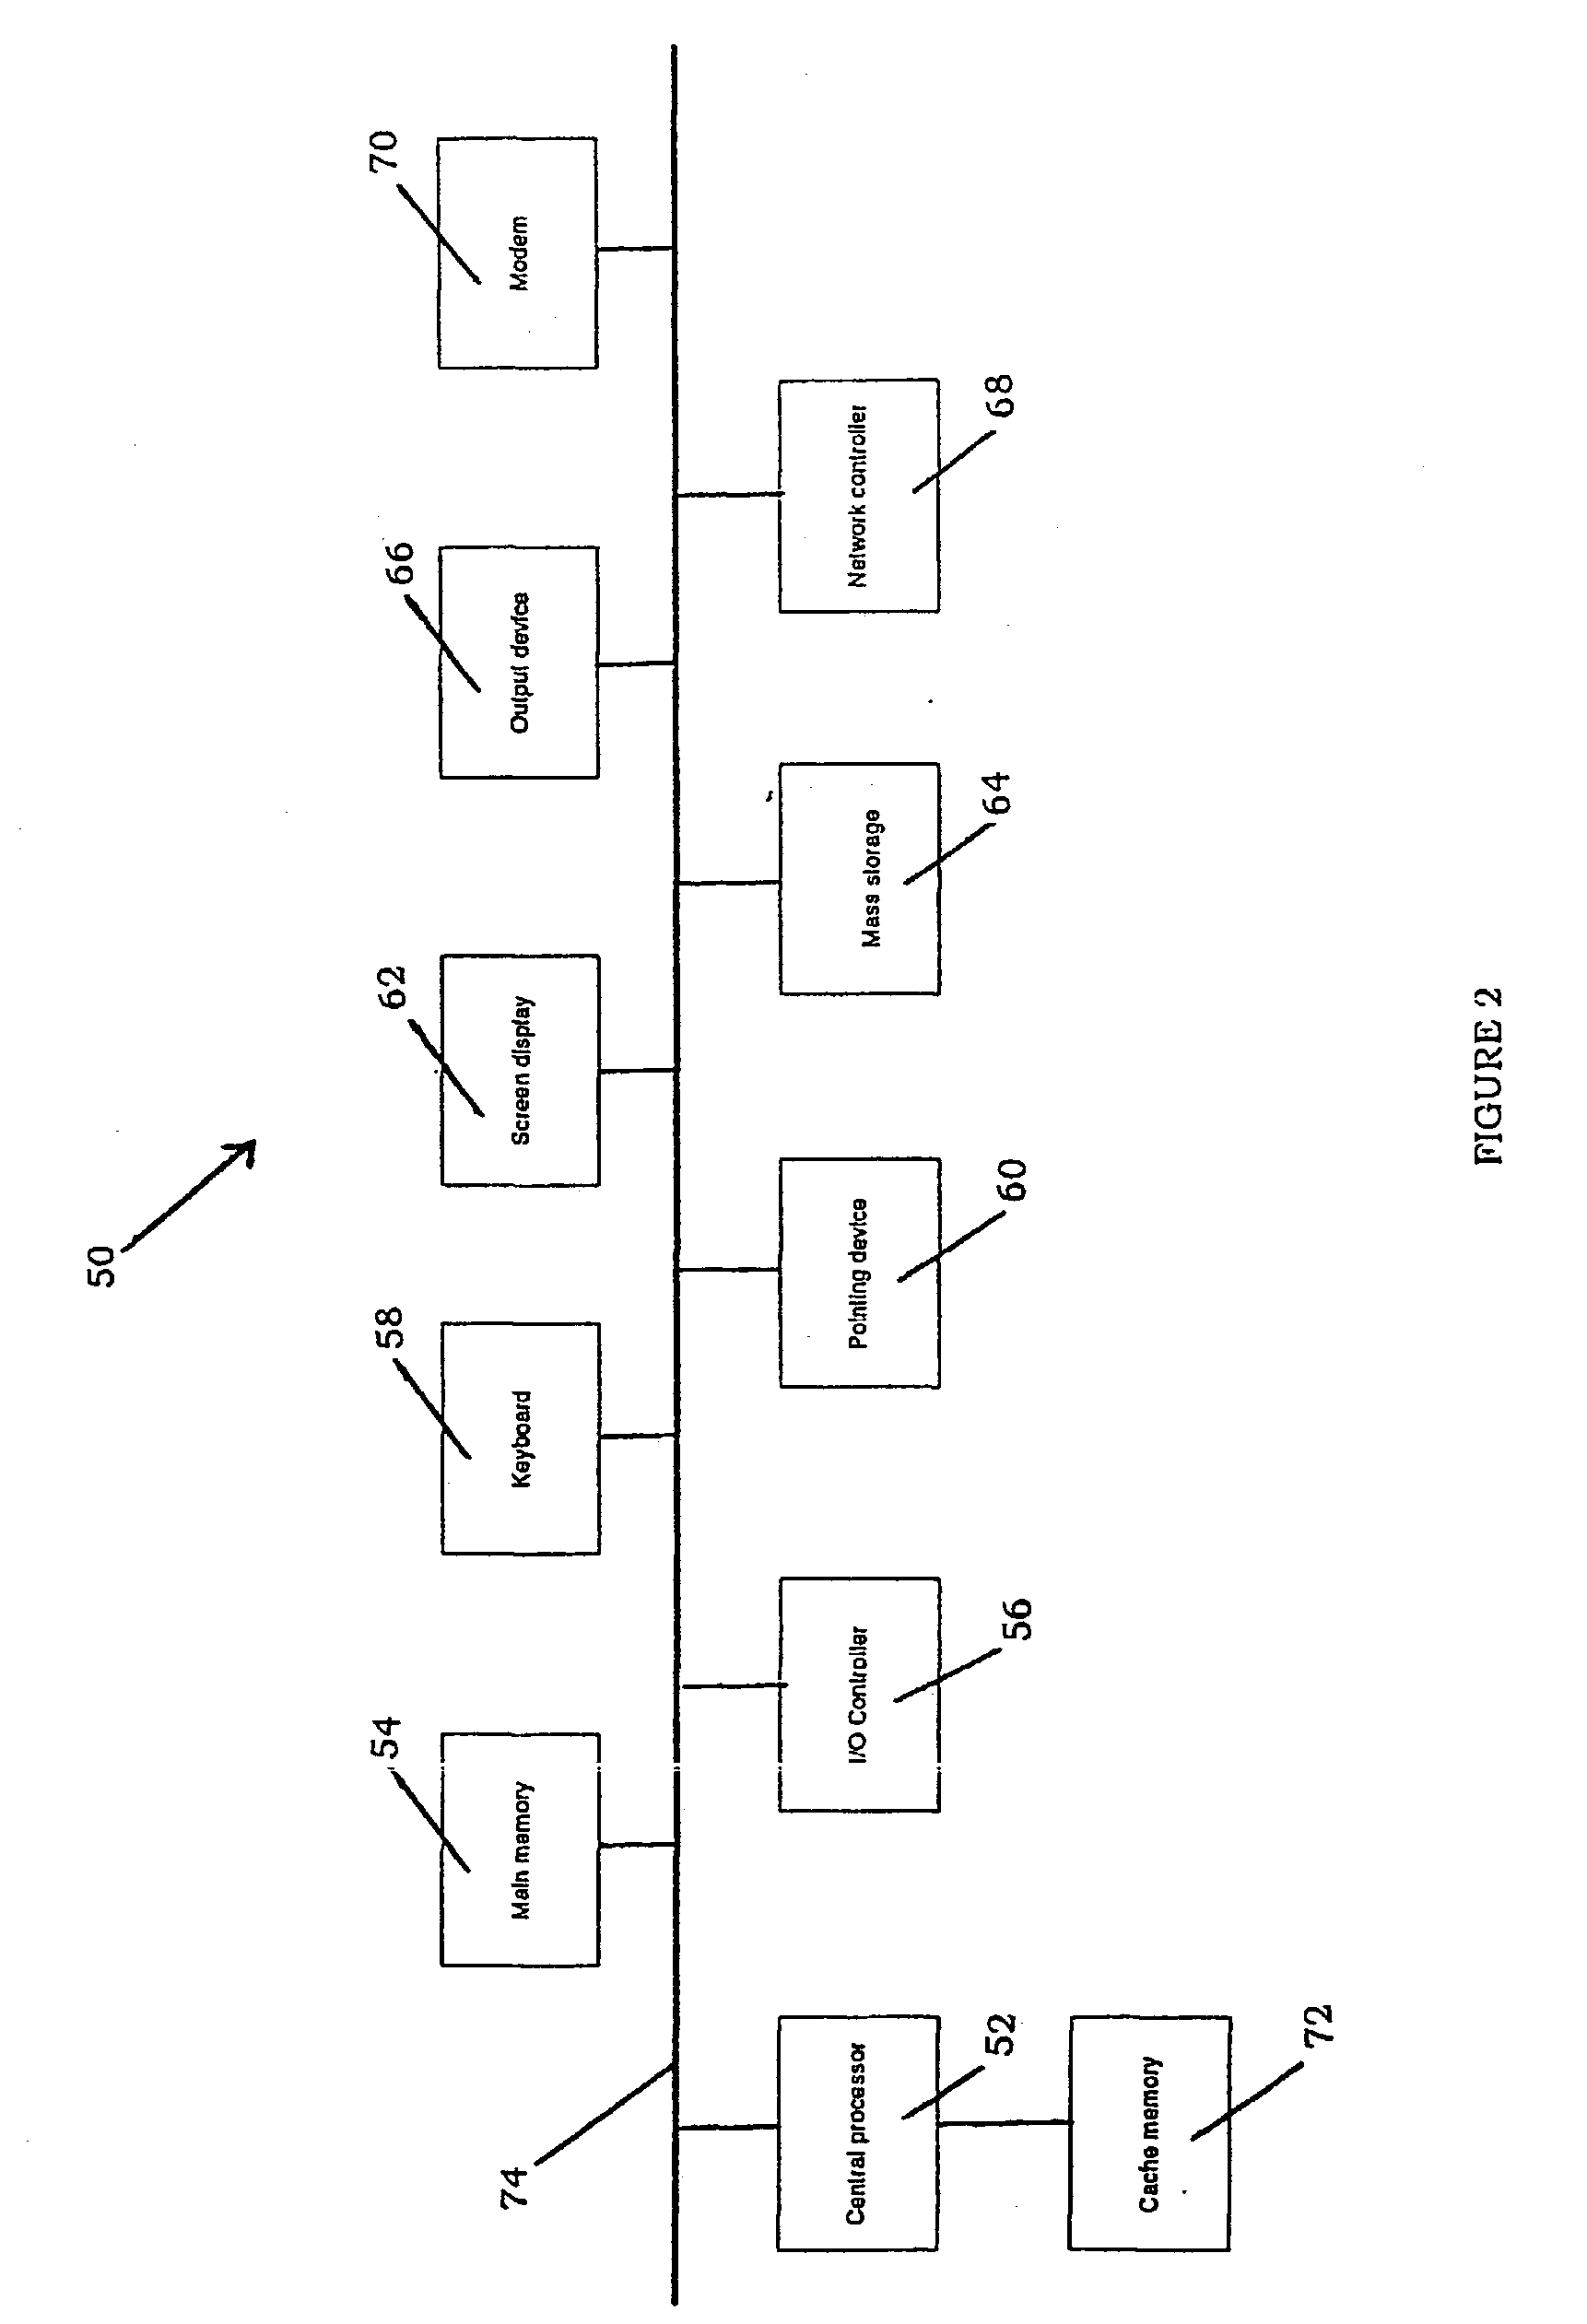 Customer activity tracking system and method